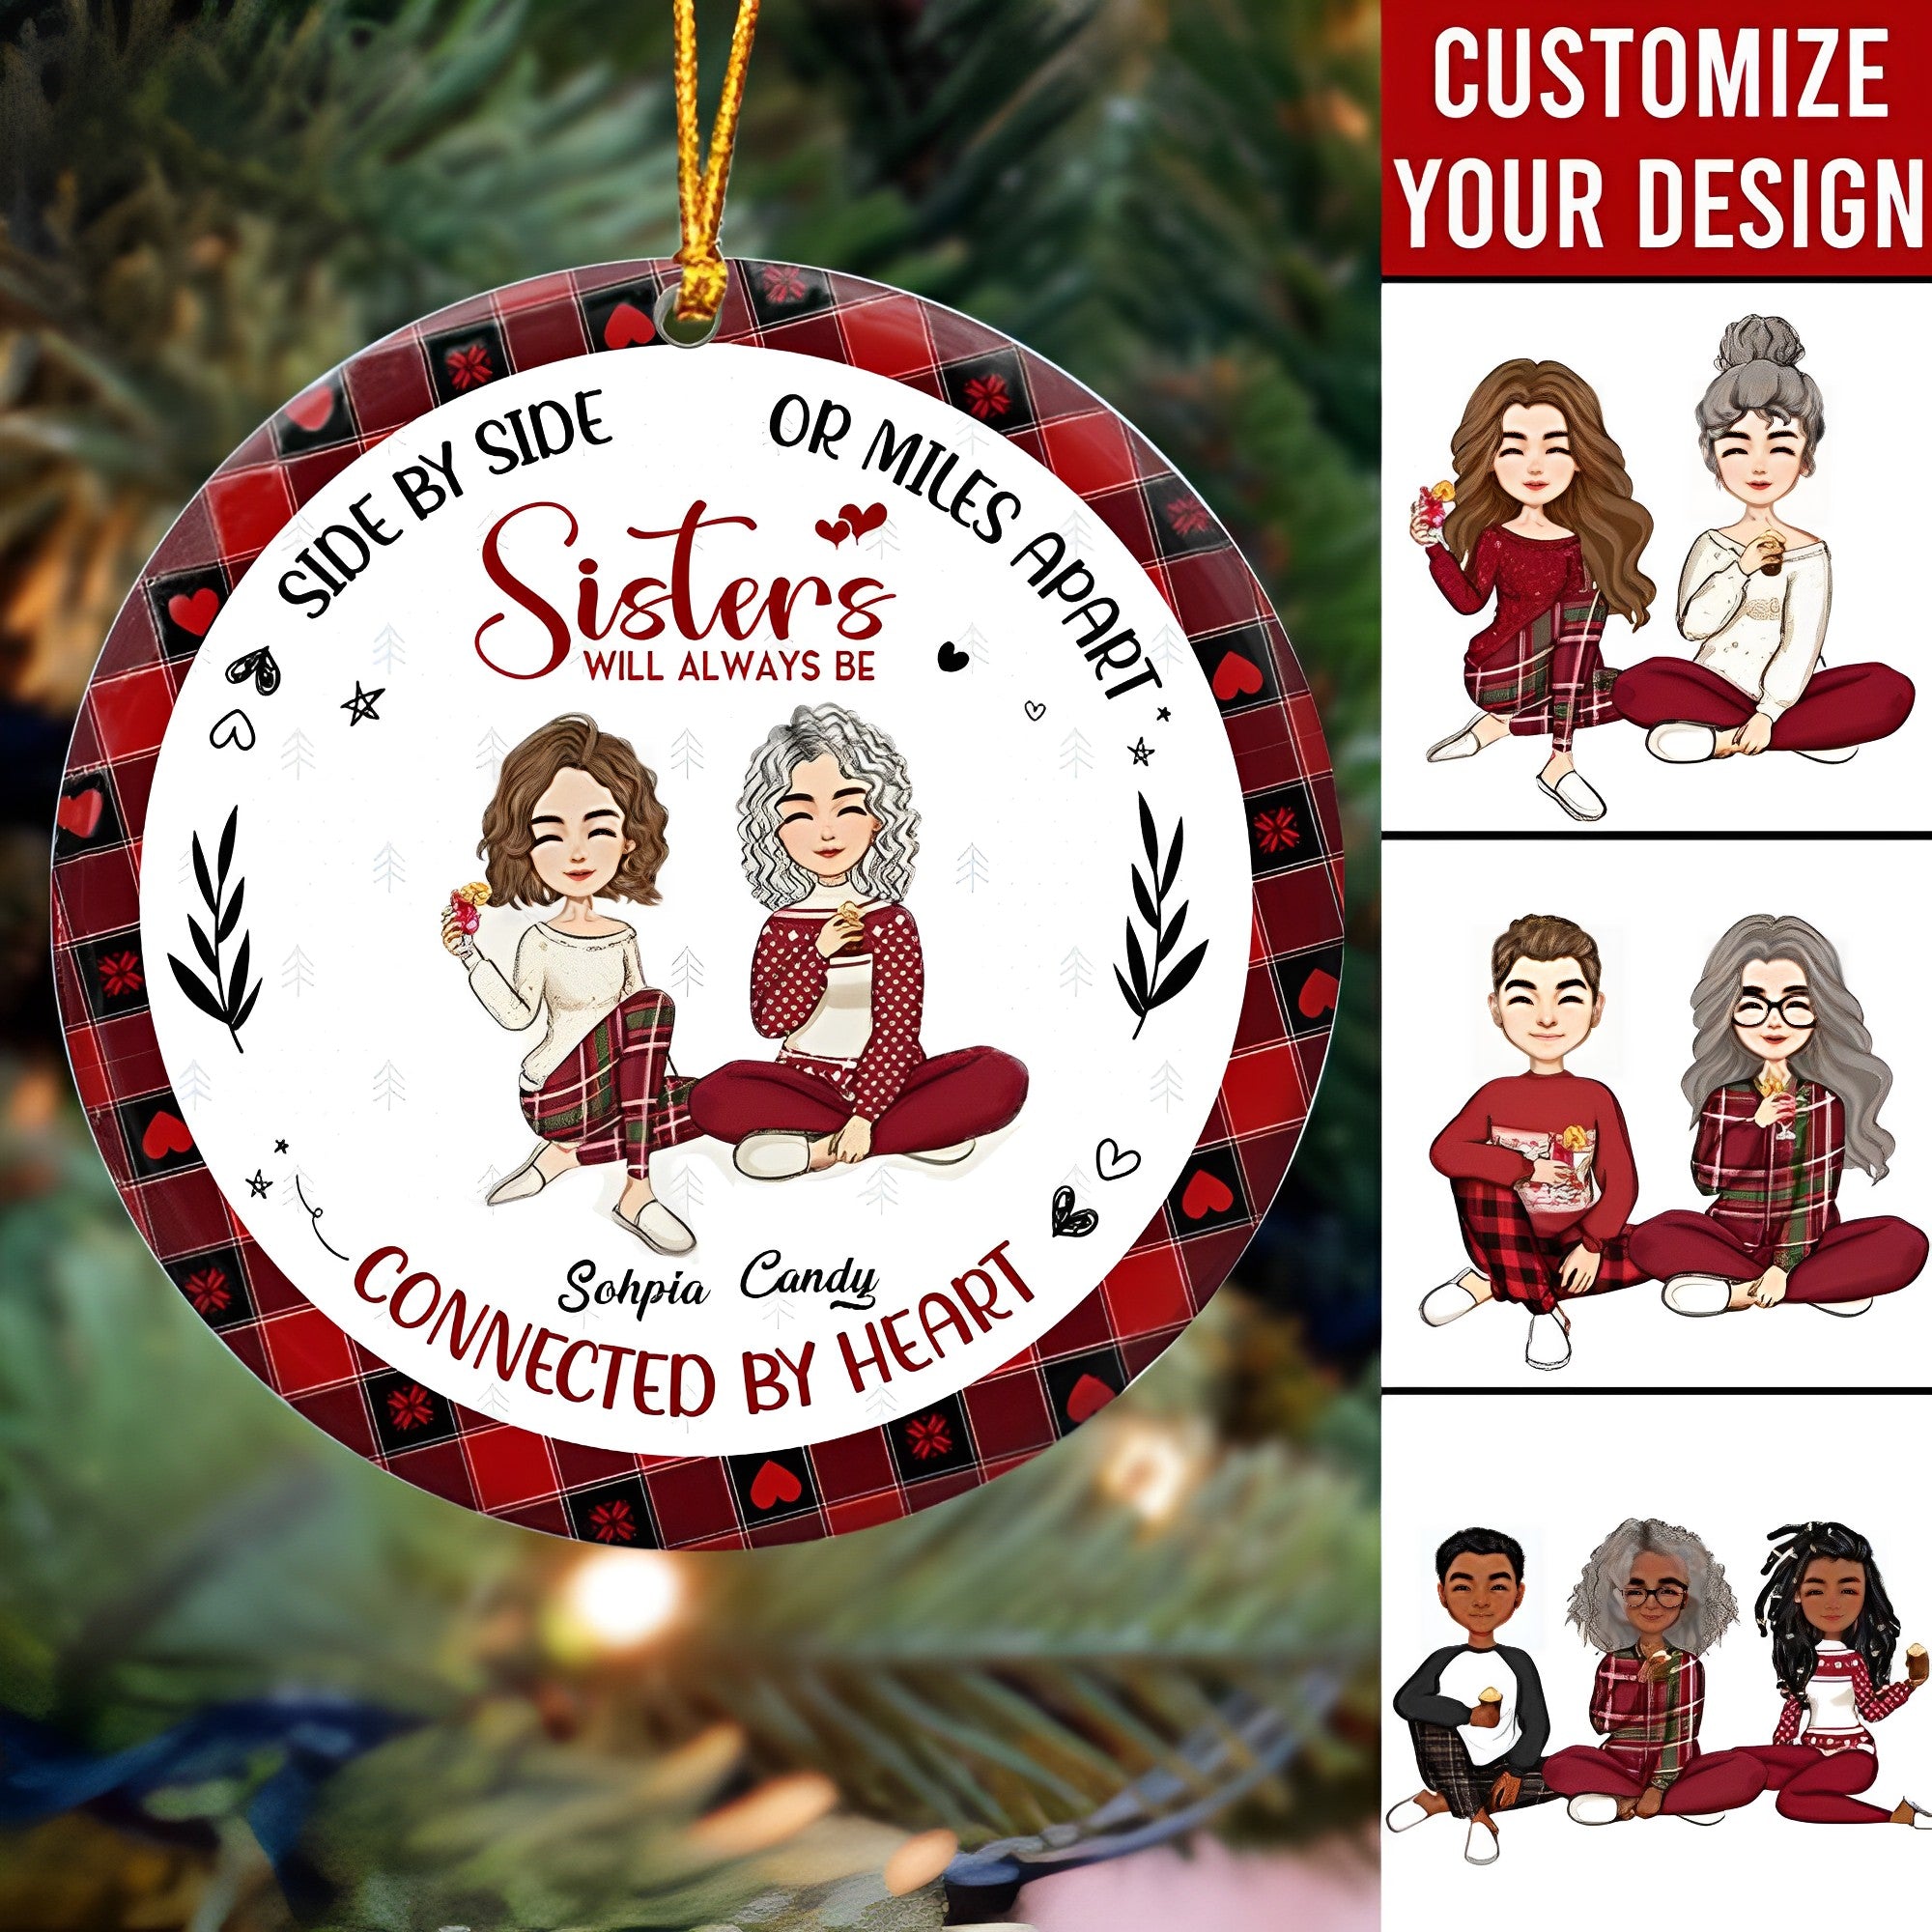 Always Be Connected By Heart - Personalized Ceramic Ornament